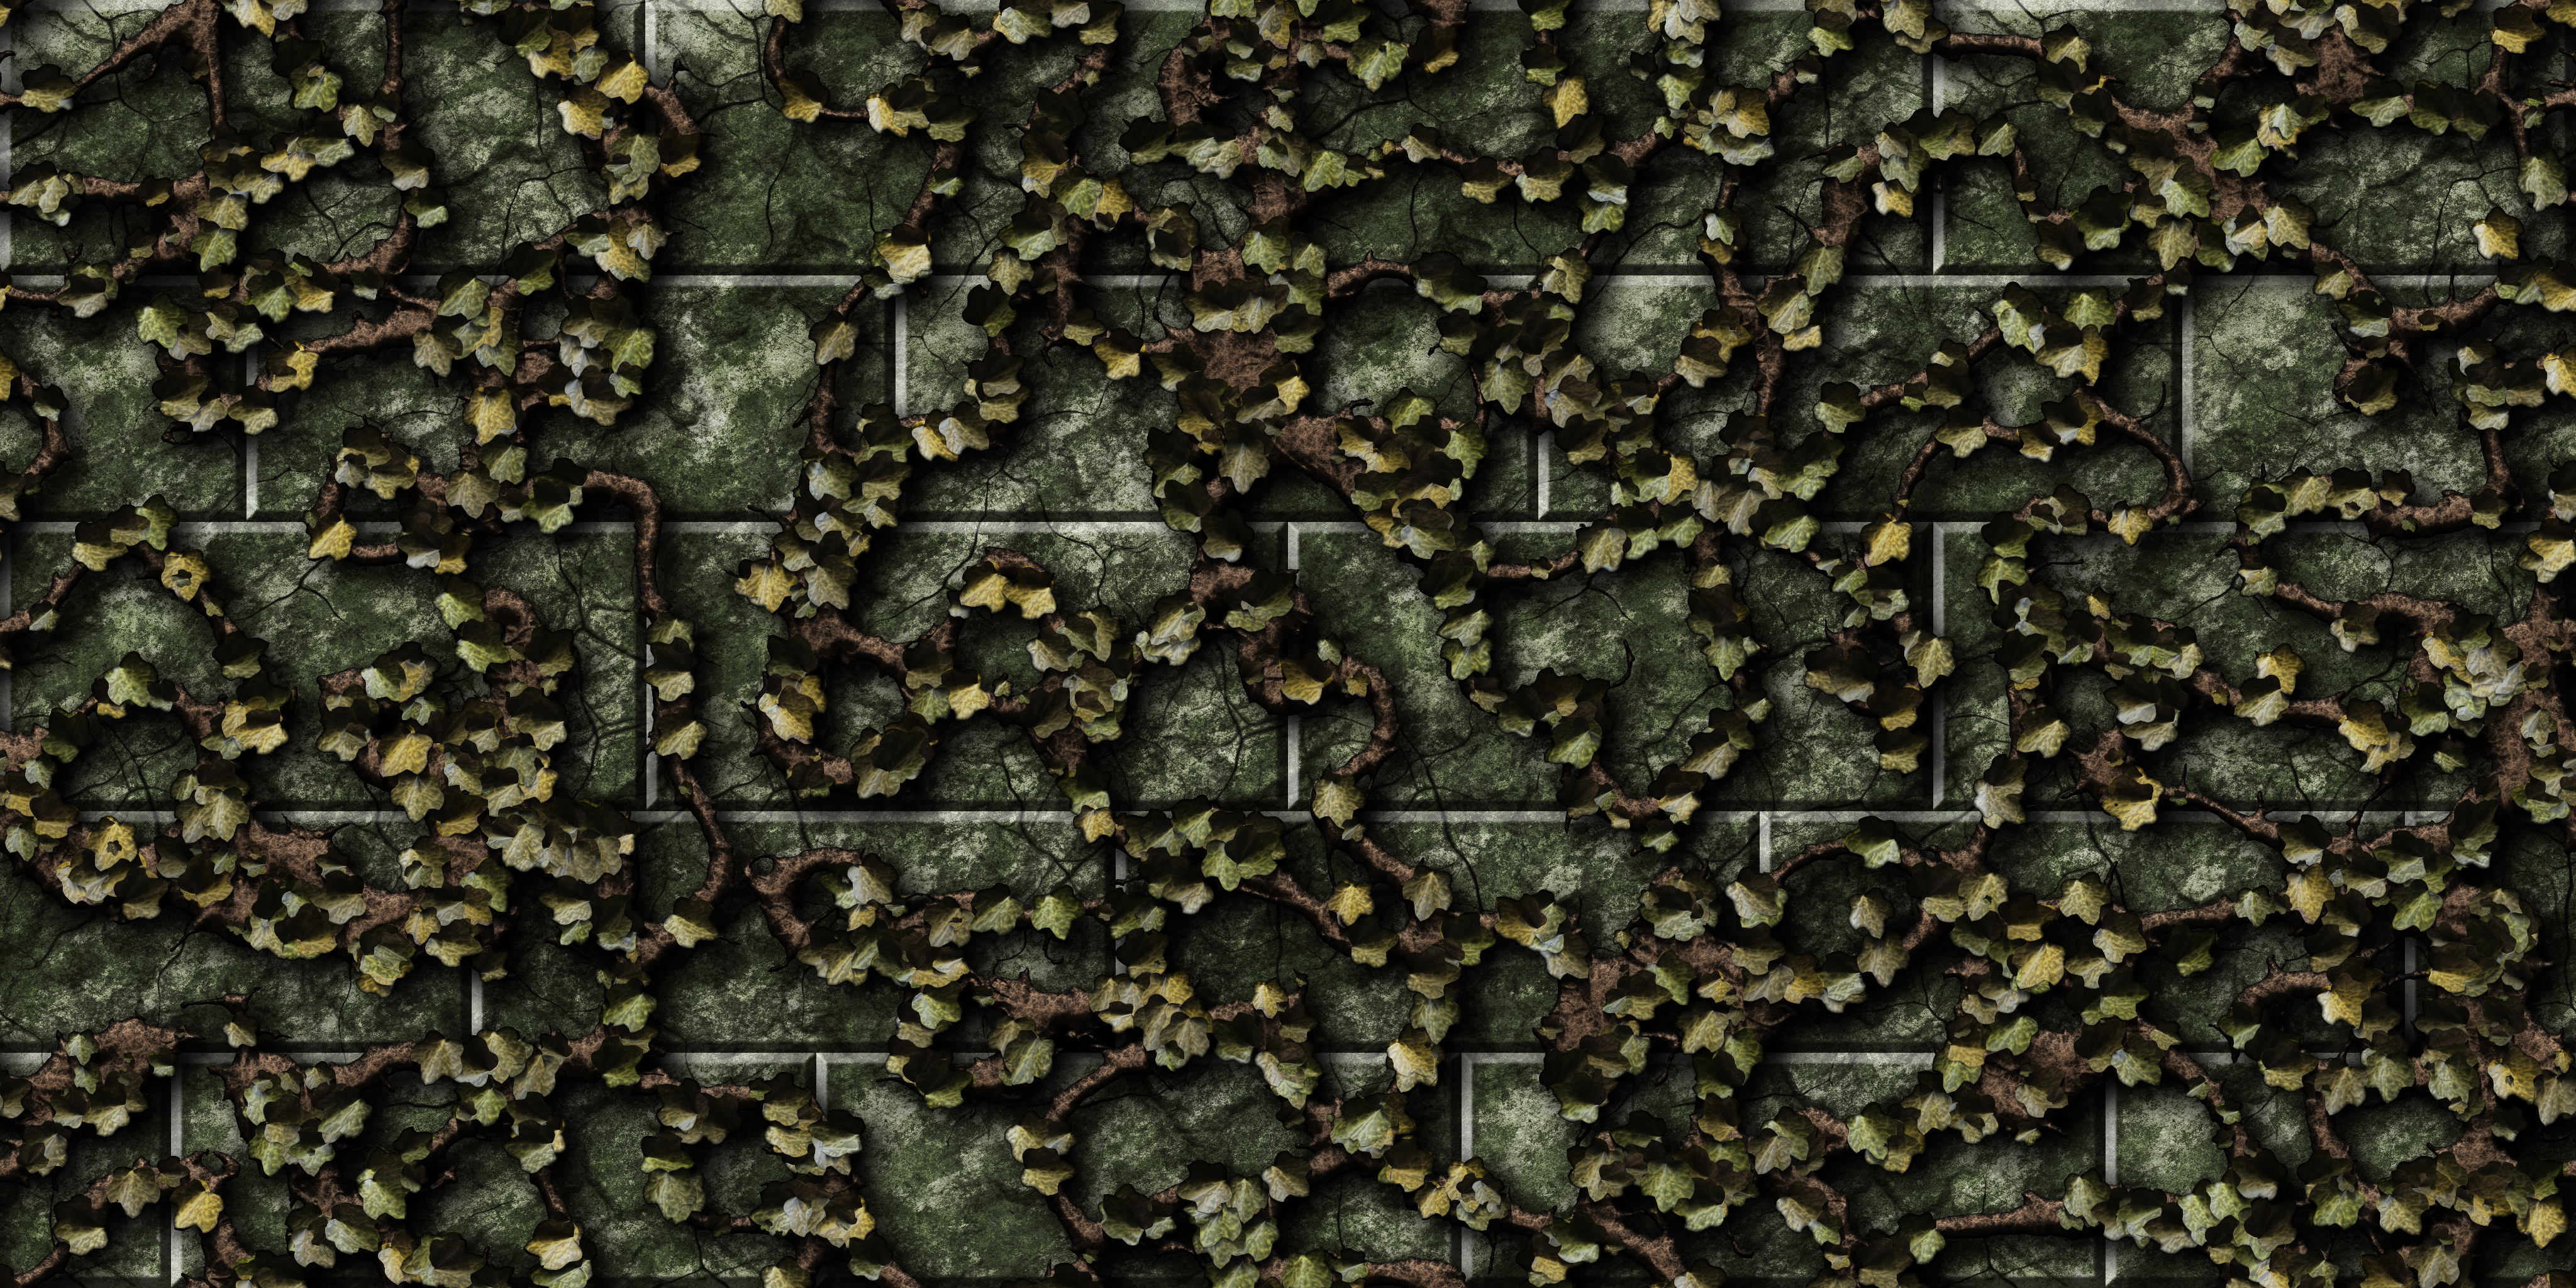 green_bricks_with_vines_02_by_hoover1979-dbavnot.png